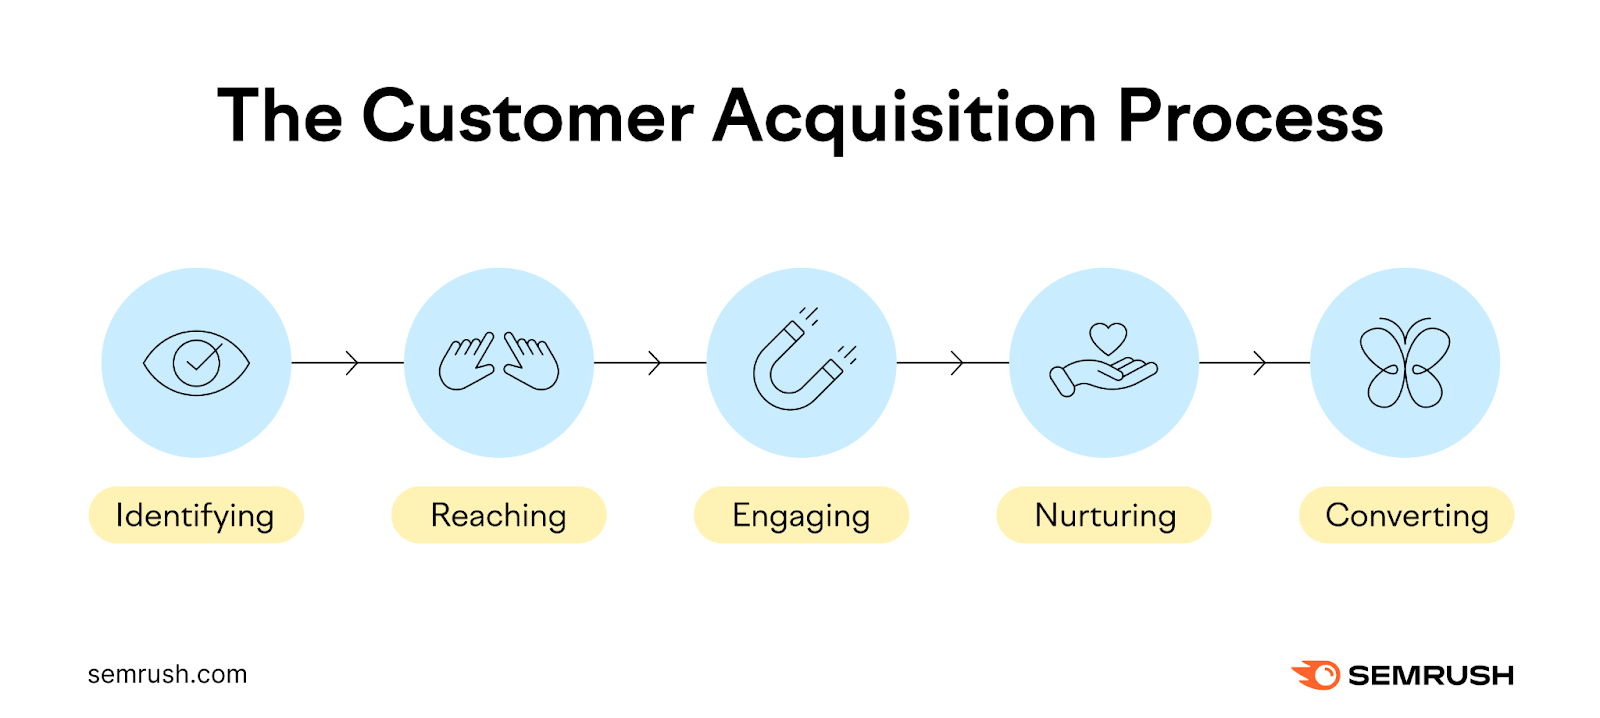 The customer acquisition process is identifying, reaching, engaging, nurturing, and converting.